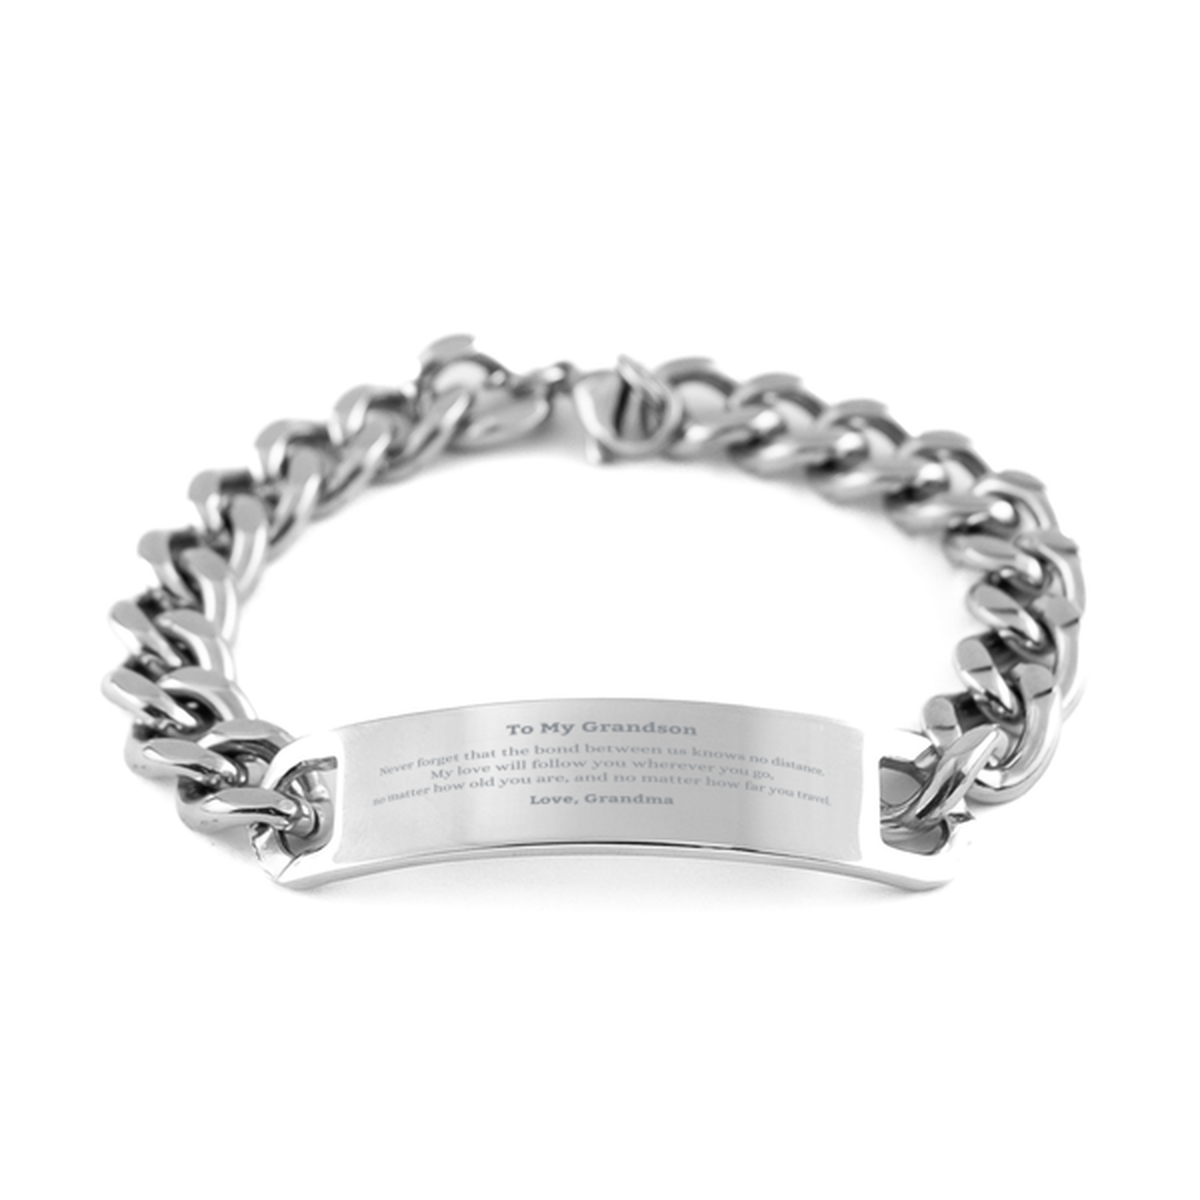 Grandson Birthday Gifts from Grandma, Adjustable Cuban Chain Stainless Steel Bracelet for Grandson Christmas Graduation Unique Gifts Grandson Never forget that the bond between us knows no distance. Love, Grandma